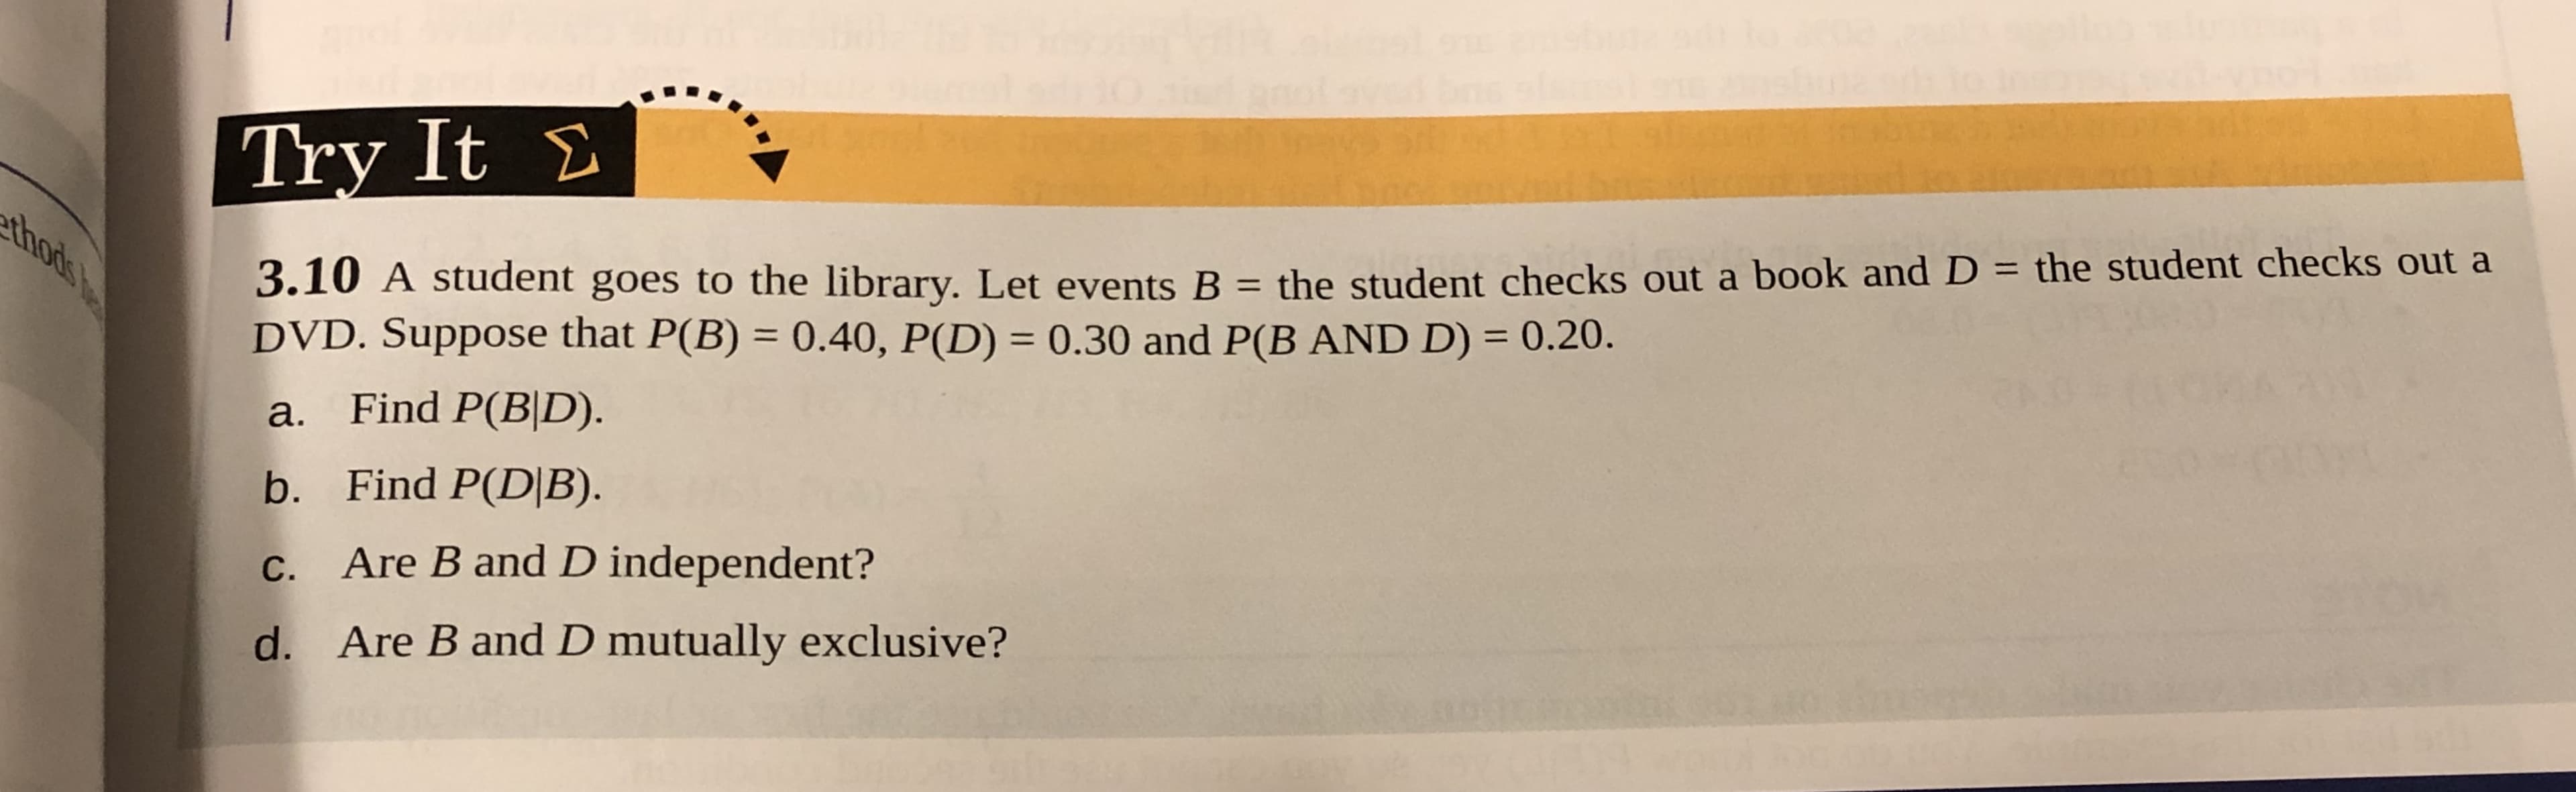 Try It Σ
3.10 A student goes to the library. Let events B - the student checks out a book and D - the student checks out a
DVD. Suppose that P(B) 0.40, P(D) 0.30 and P(B AND D)0.20.
a. Find P(B|D).
b. Find P(DIB)
c. Are B and D independent?
d. Are B and D mutually exclusive?
